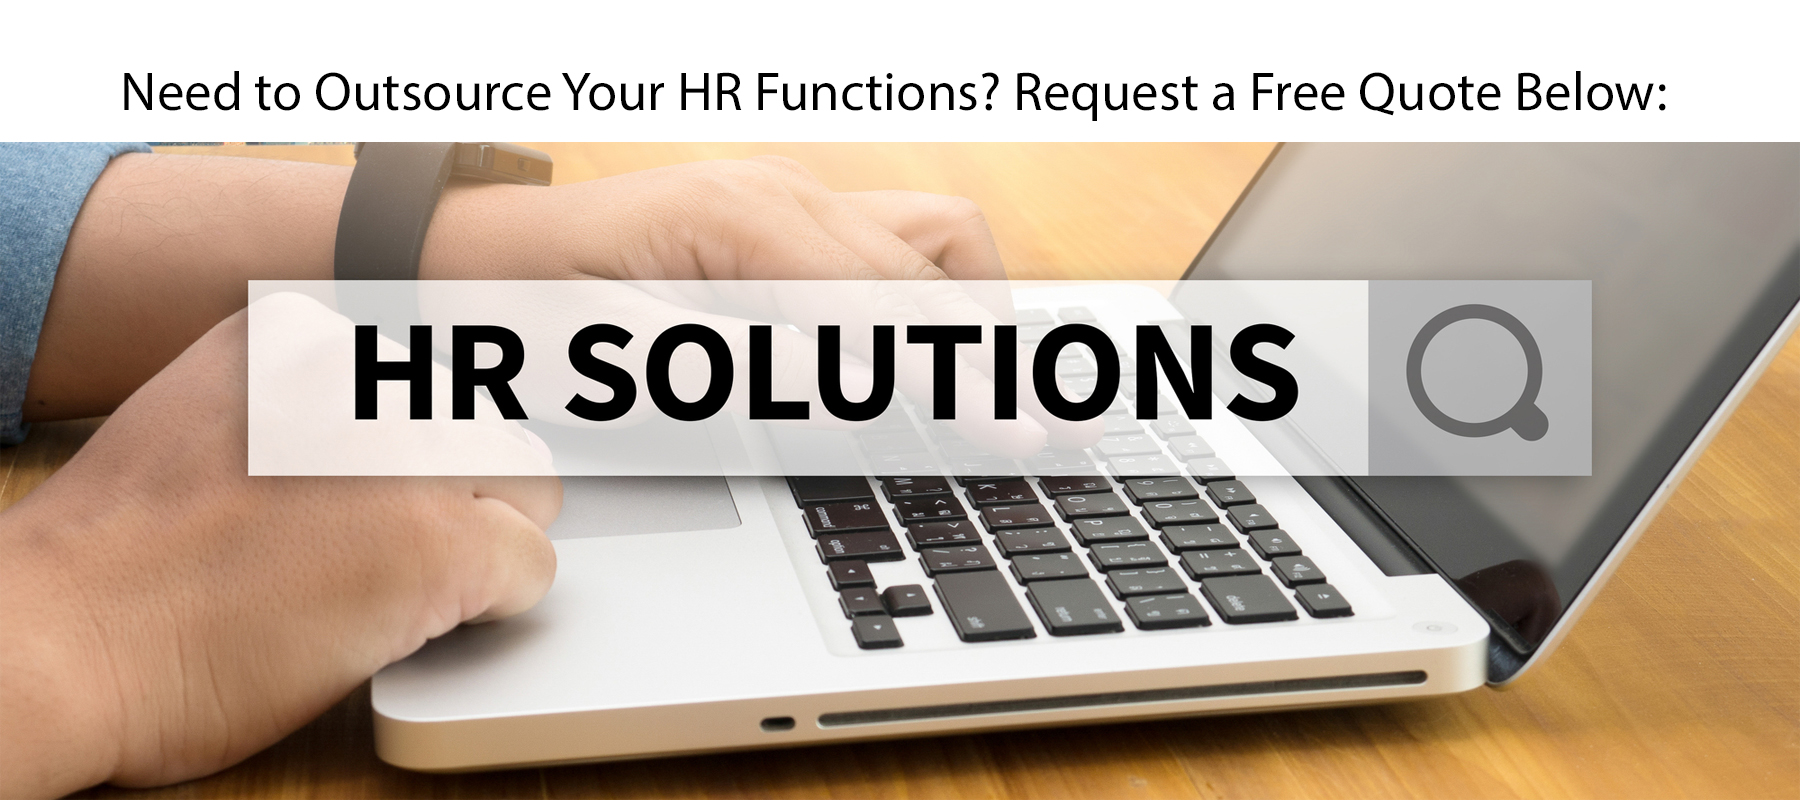 HR Outsourcing Free Price Quotes